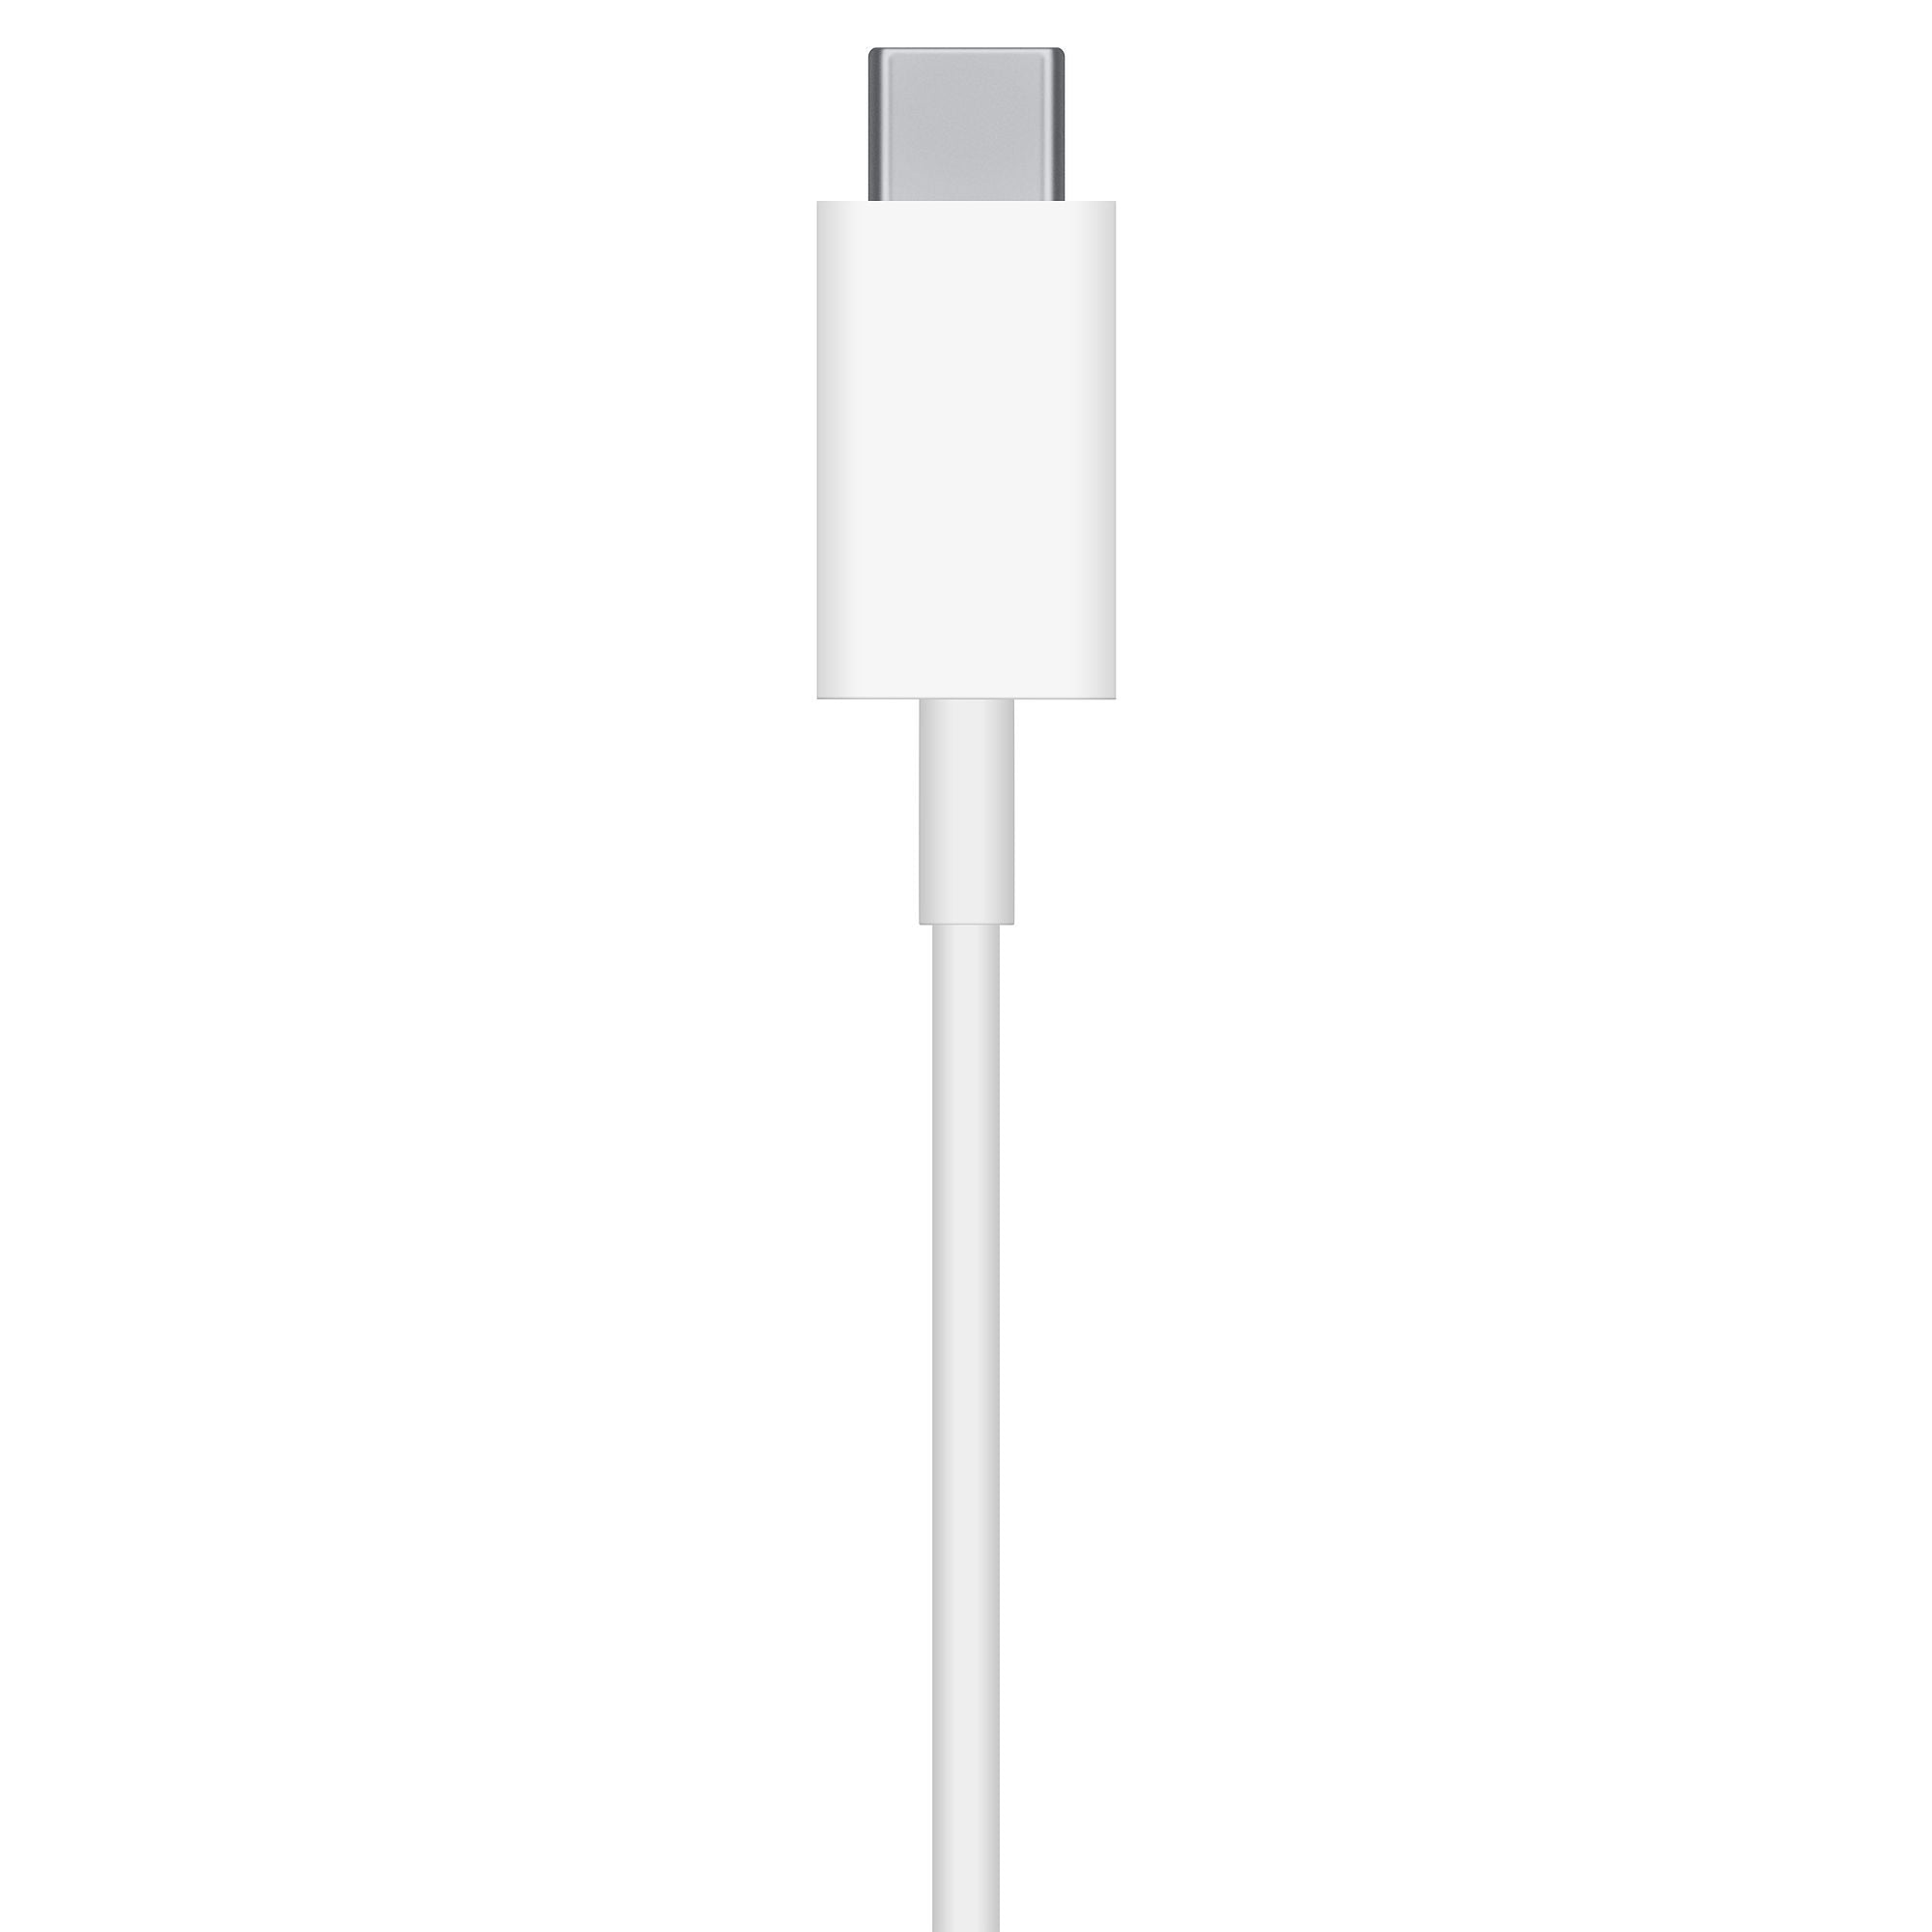 MagSafe Charger - iShop